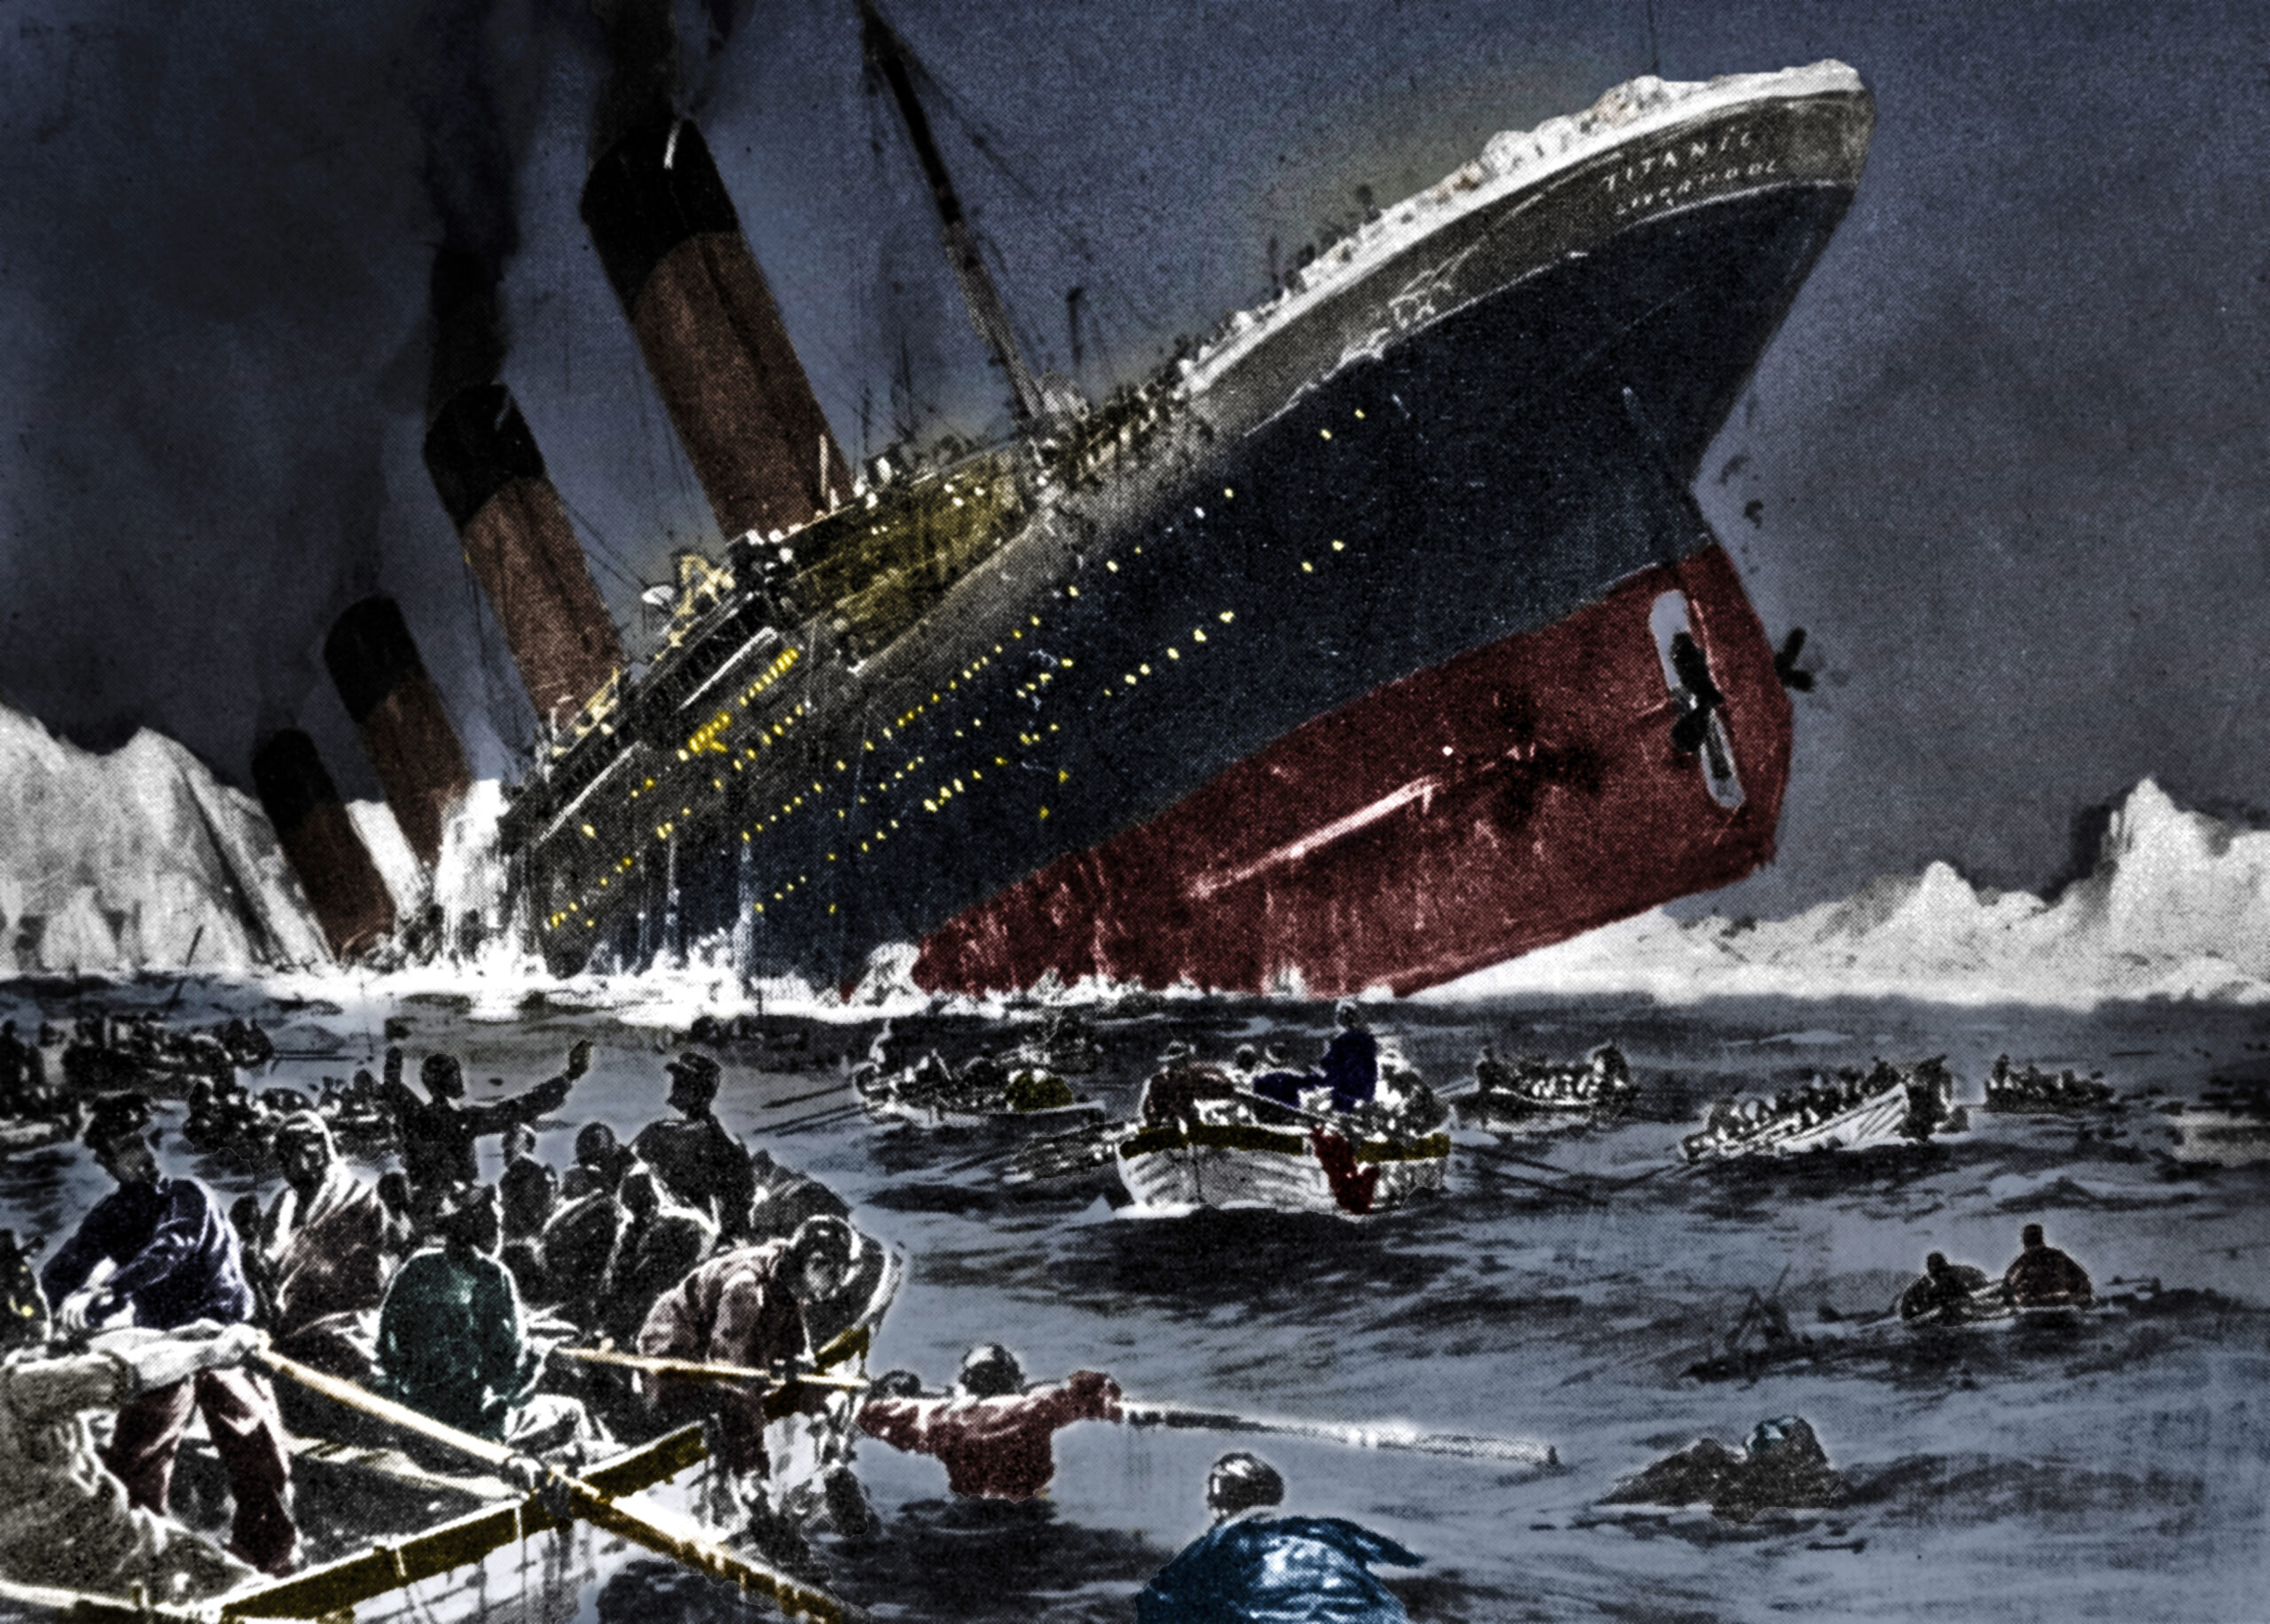 artist's depiction of lifeboats around sinking of titanic